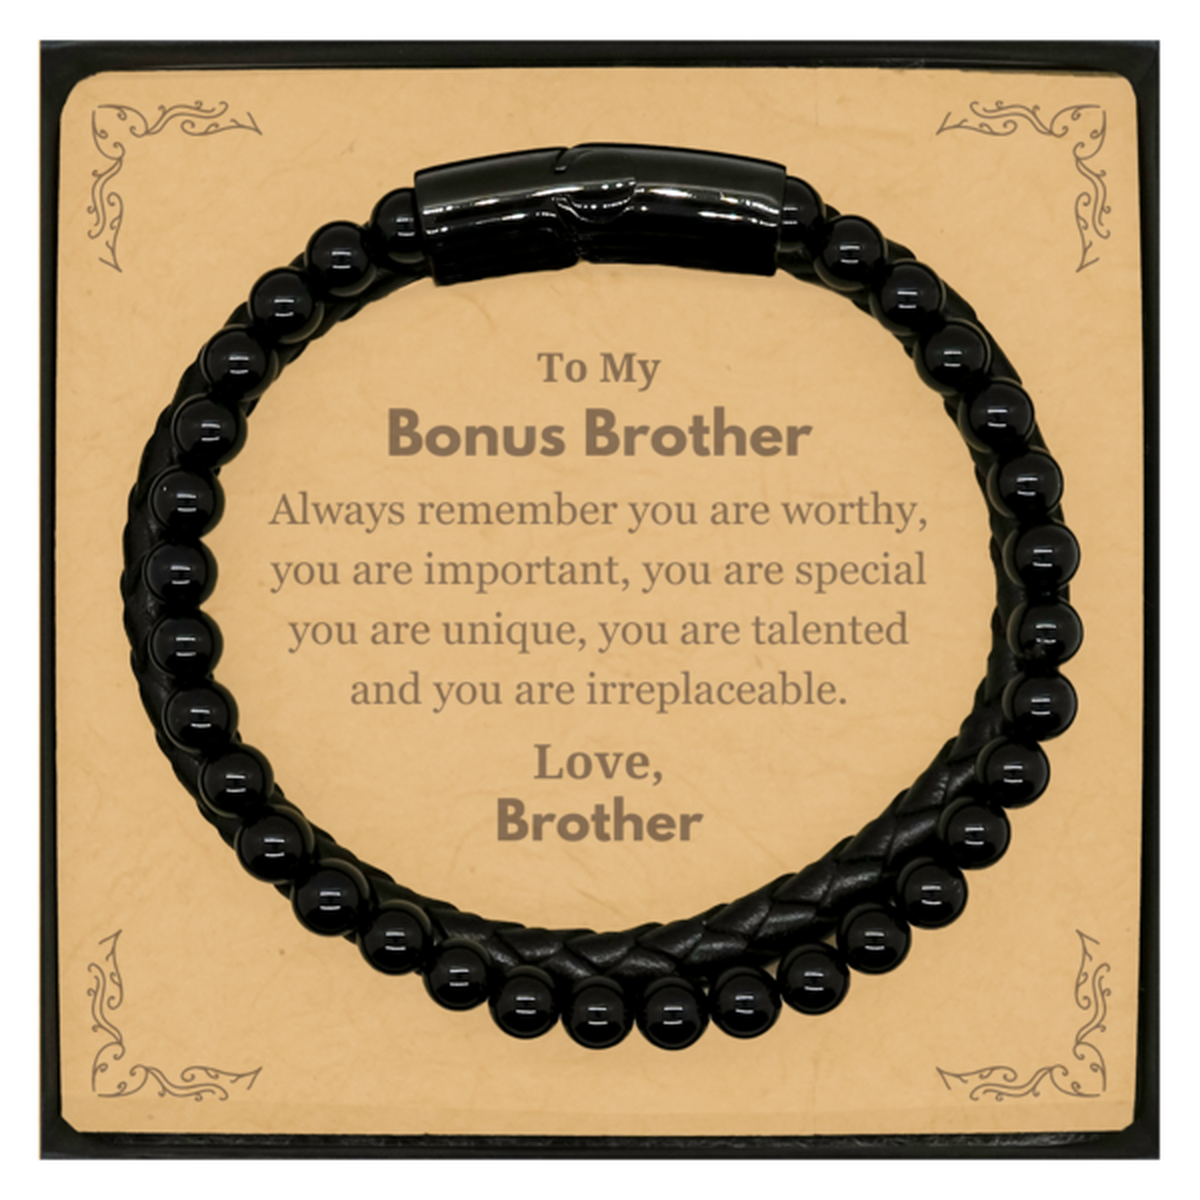 Bonus Brother Birthday Gifts from Brother, Inspirational Stone Leather Bracelets for Bonus Brother Christmas Graduation Gifts for Bonus Brother Always remember you are worthy, you are important. Love, Brother